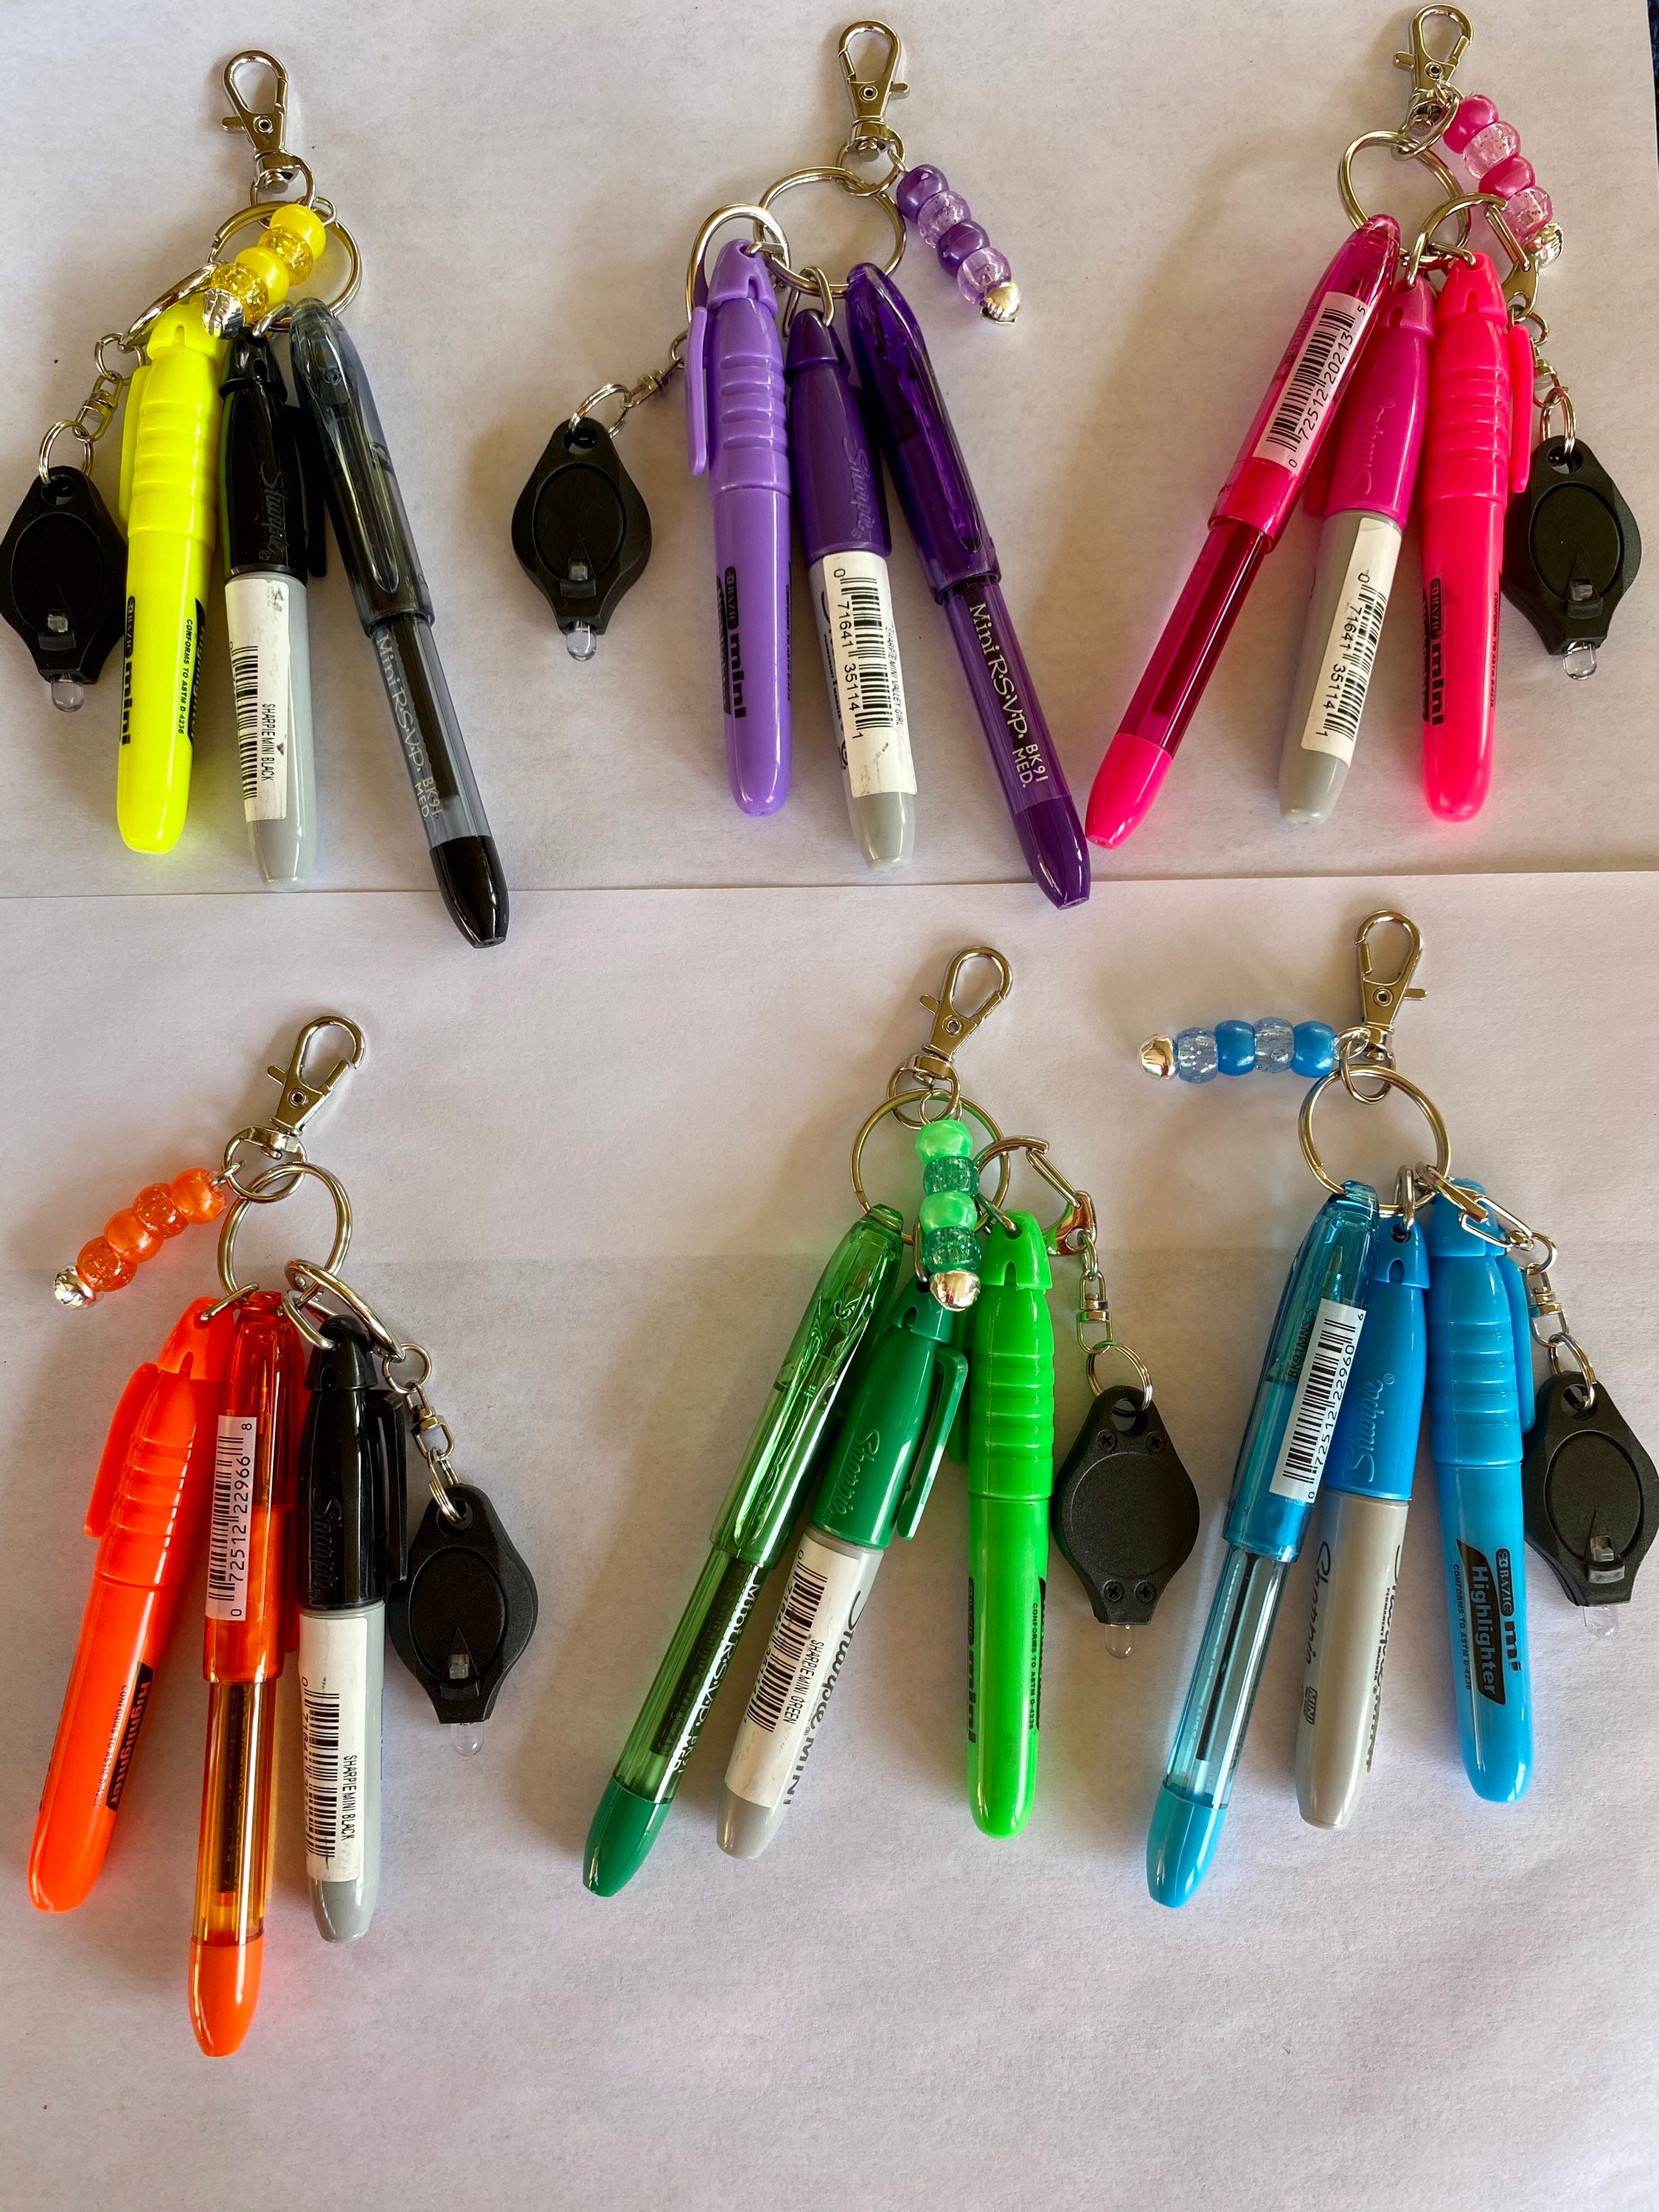 Badge Reel Clip-on Accessories, mini Sharpie, Pen, Highlighter, and Led  Light , Badge Reel Keychain, Lanyard Clip Accessories 